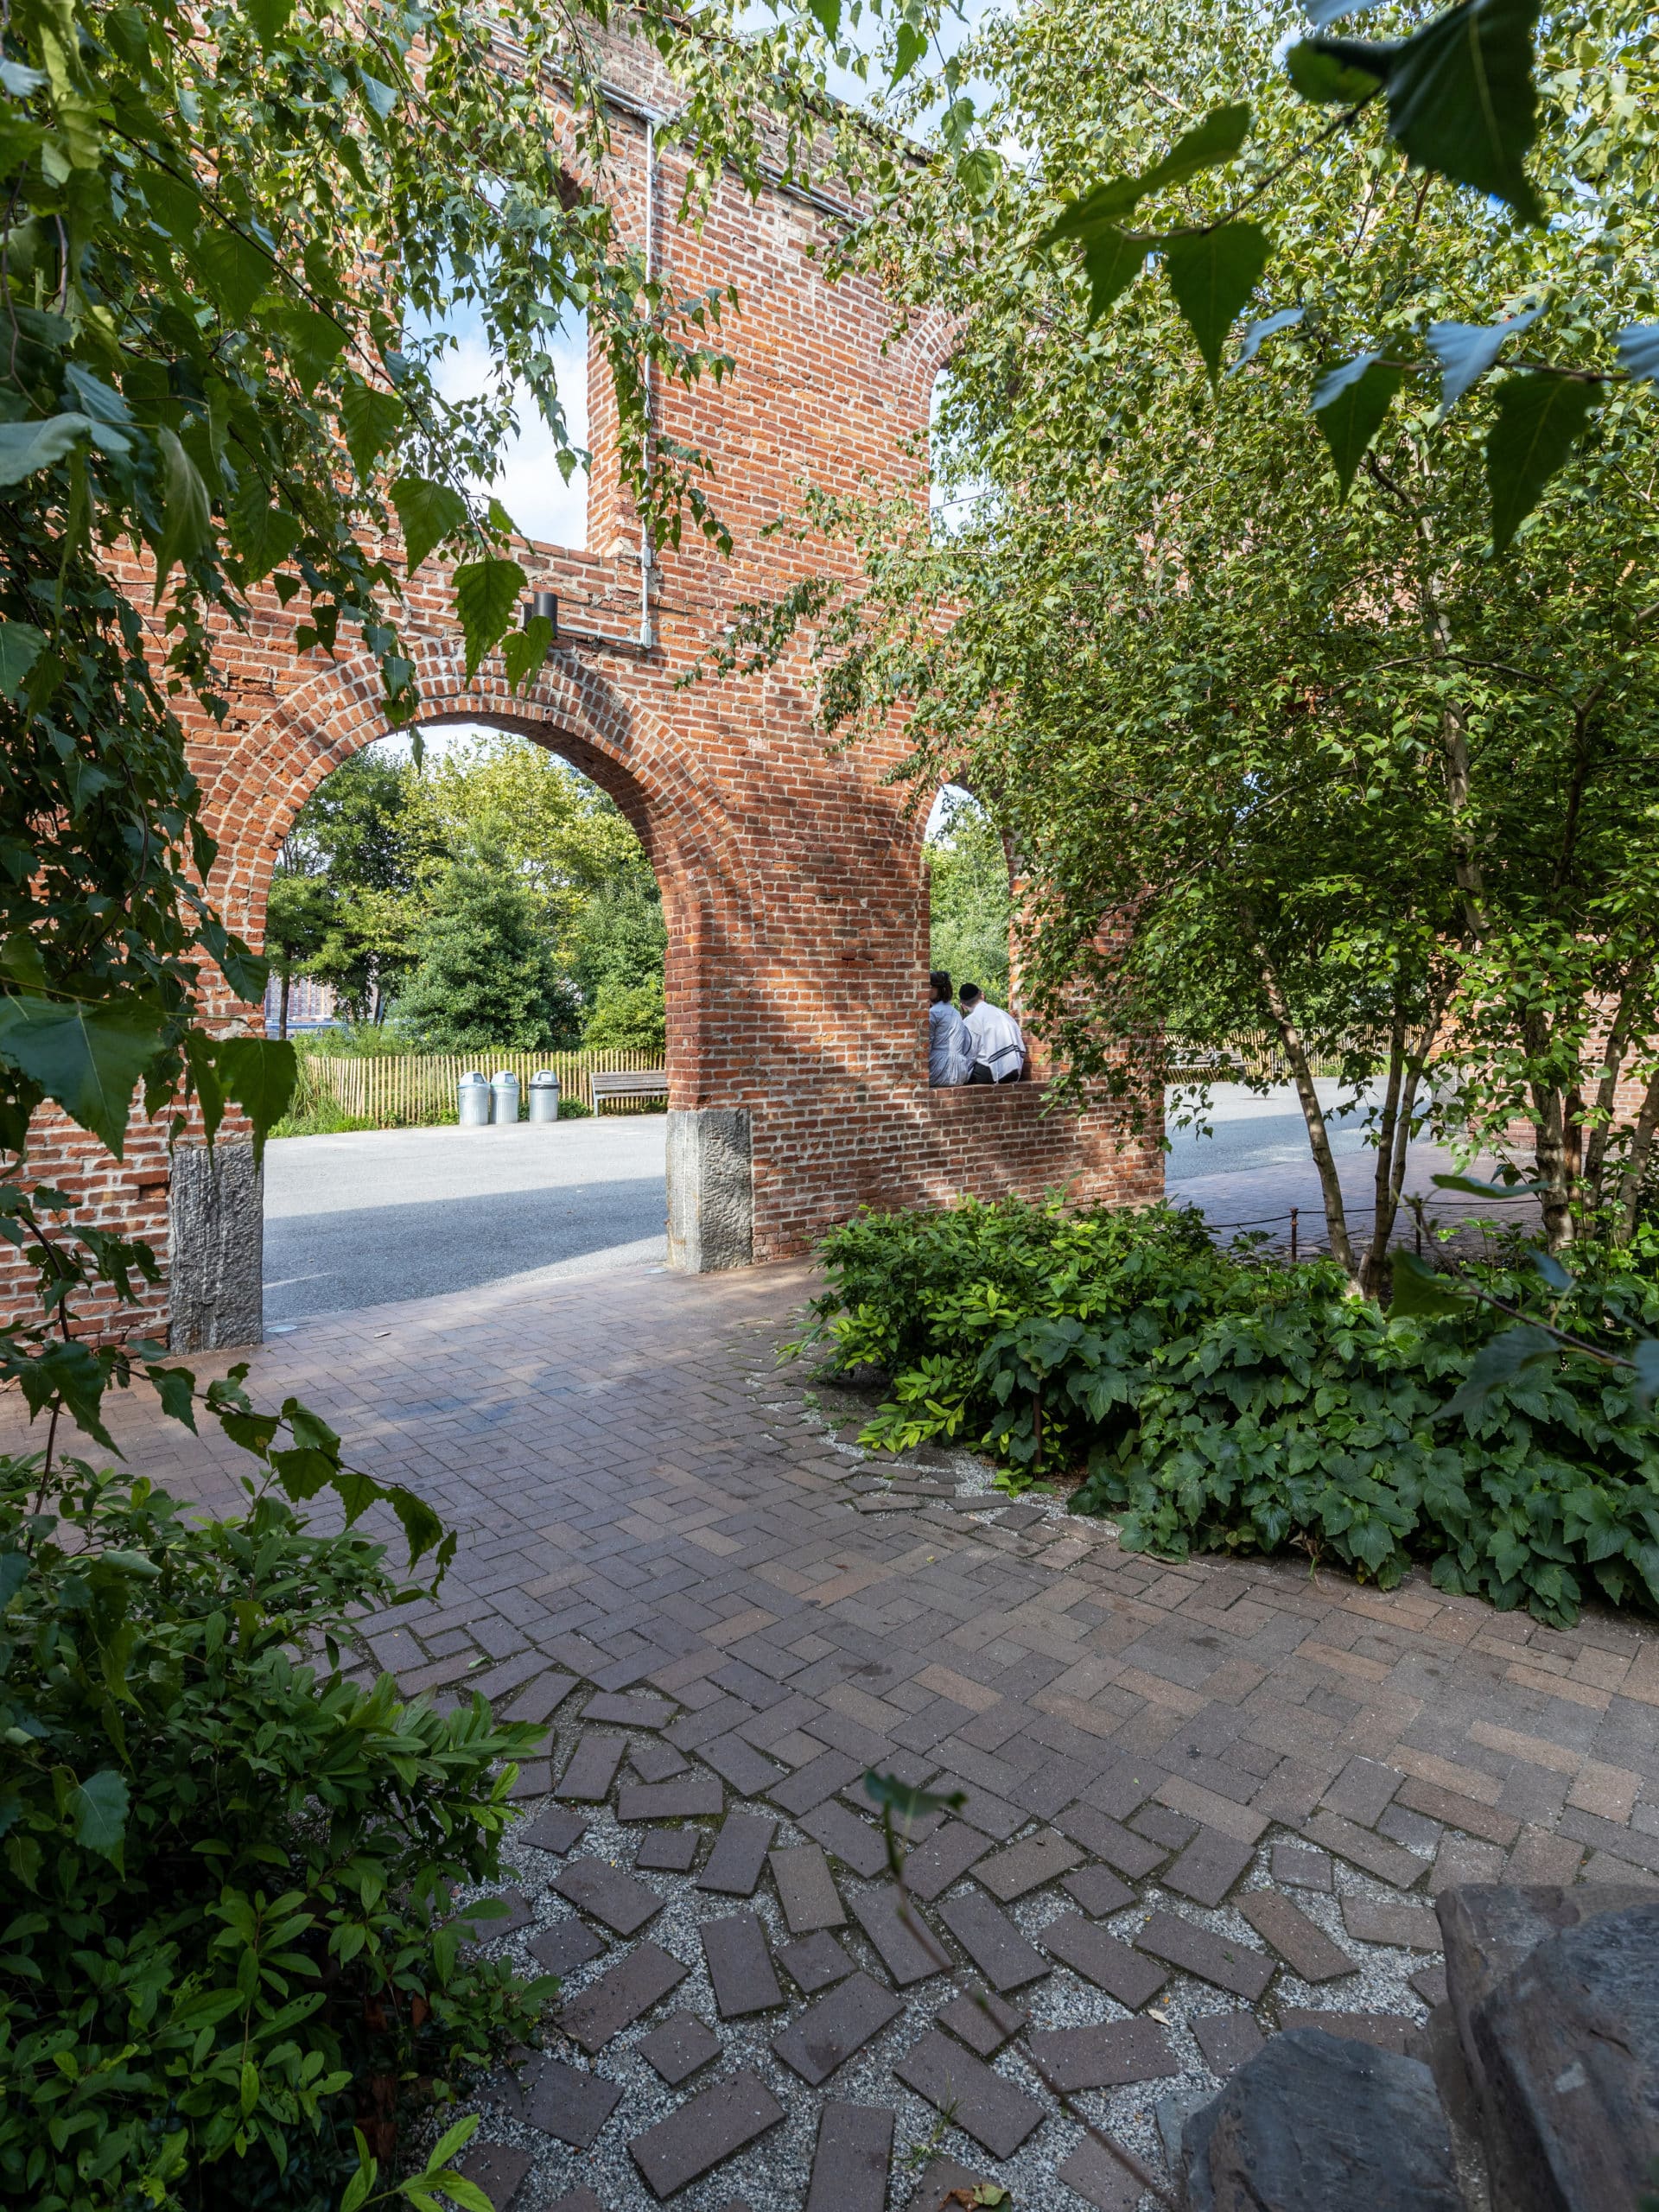 Tree-lined pathway facing the arched brick entrance to Max Family Garden on a sunny day.